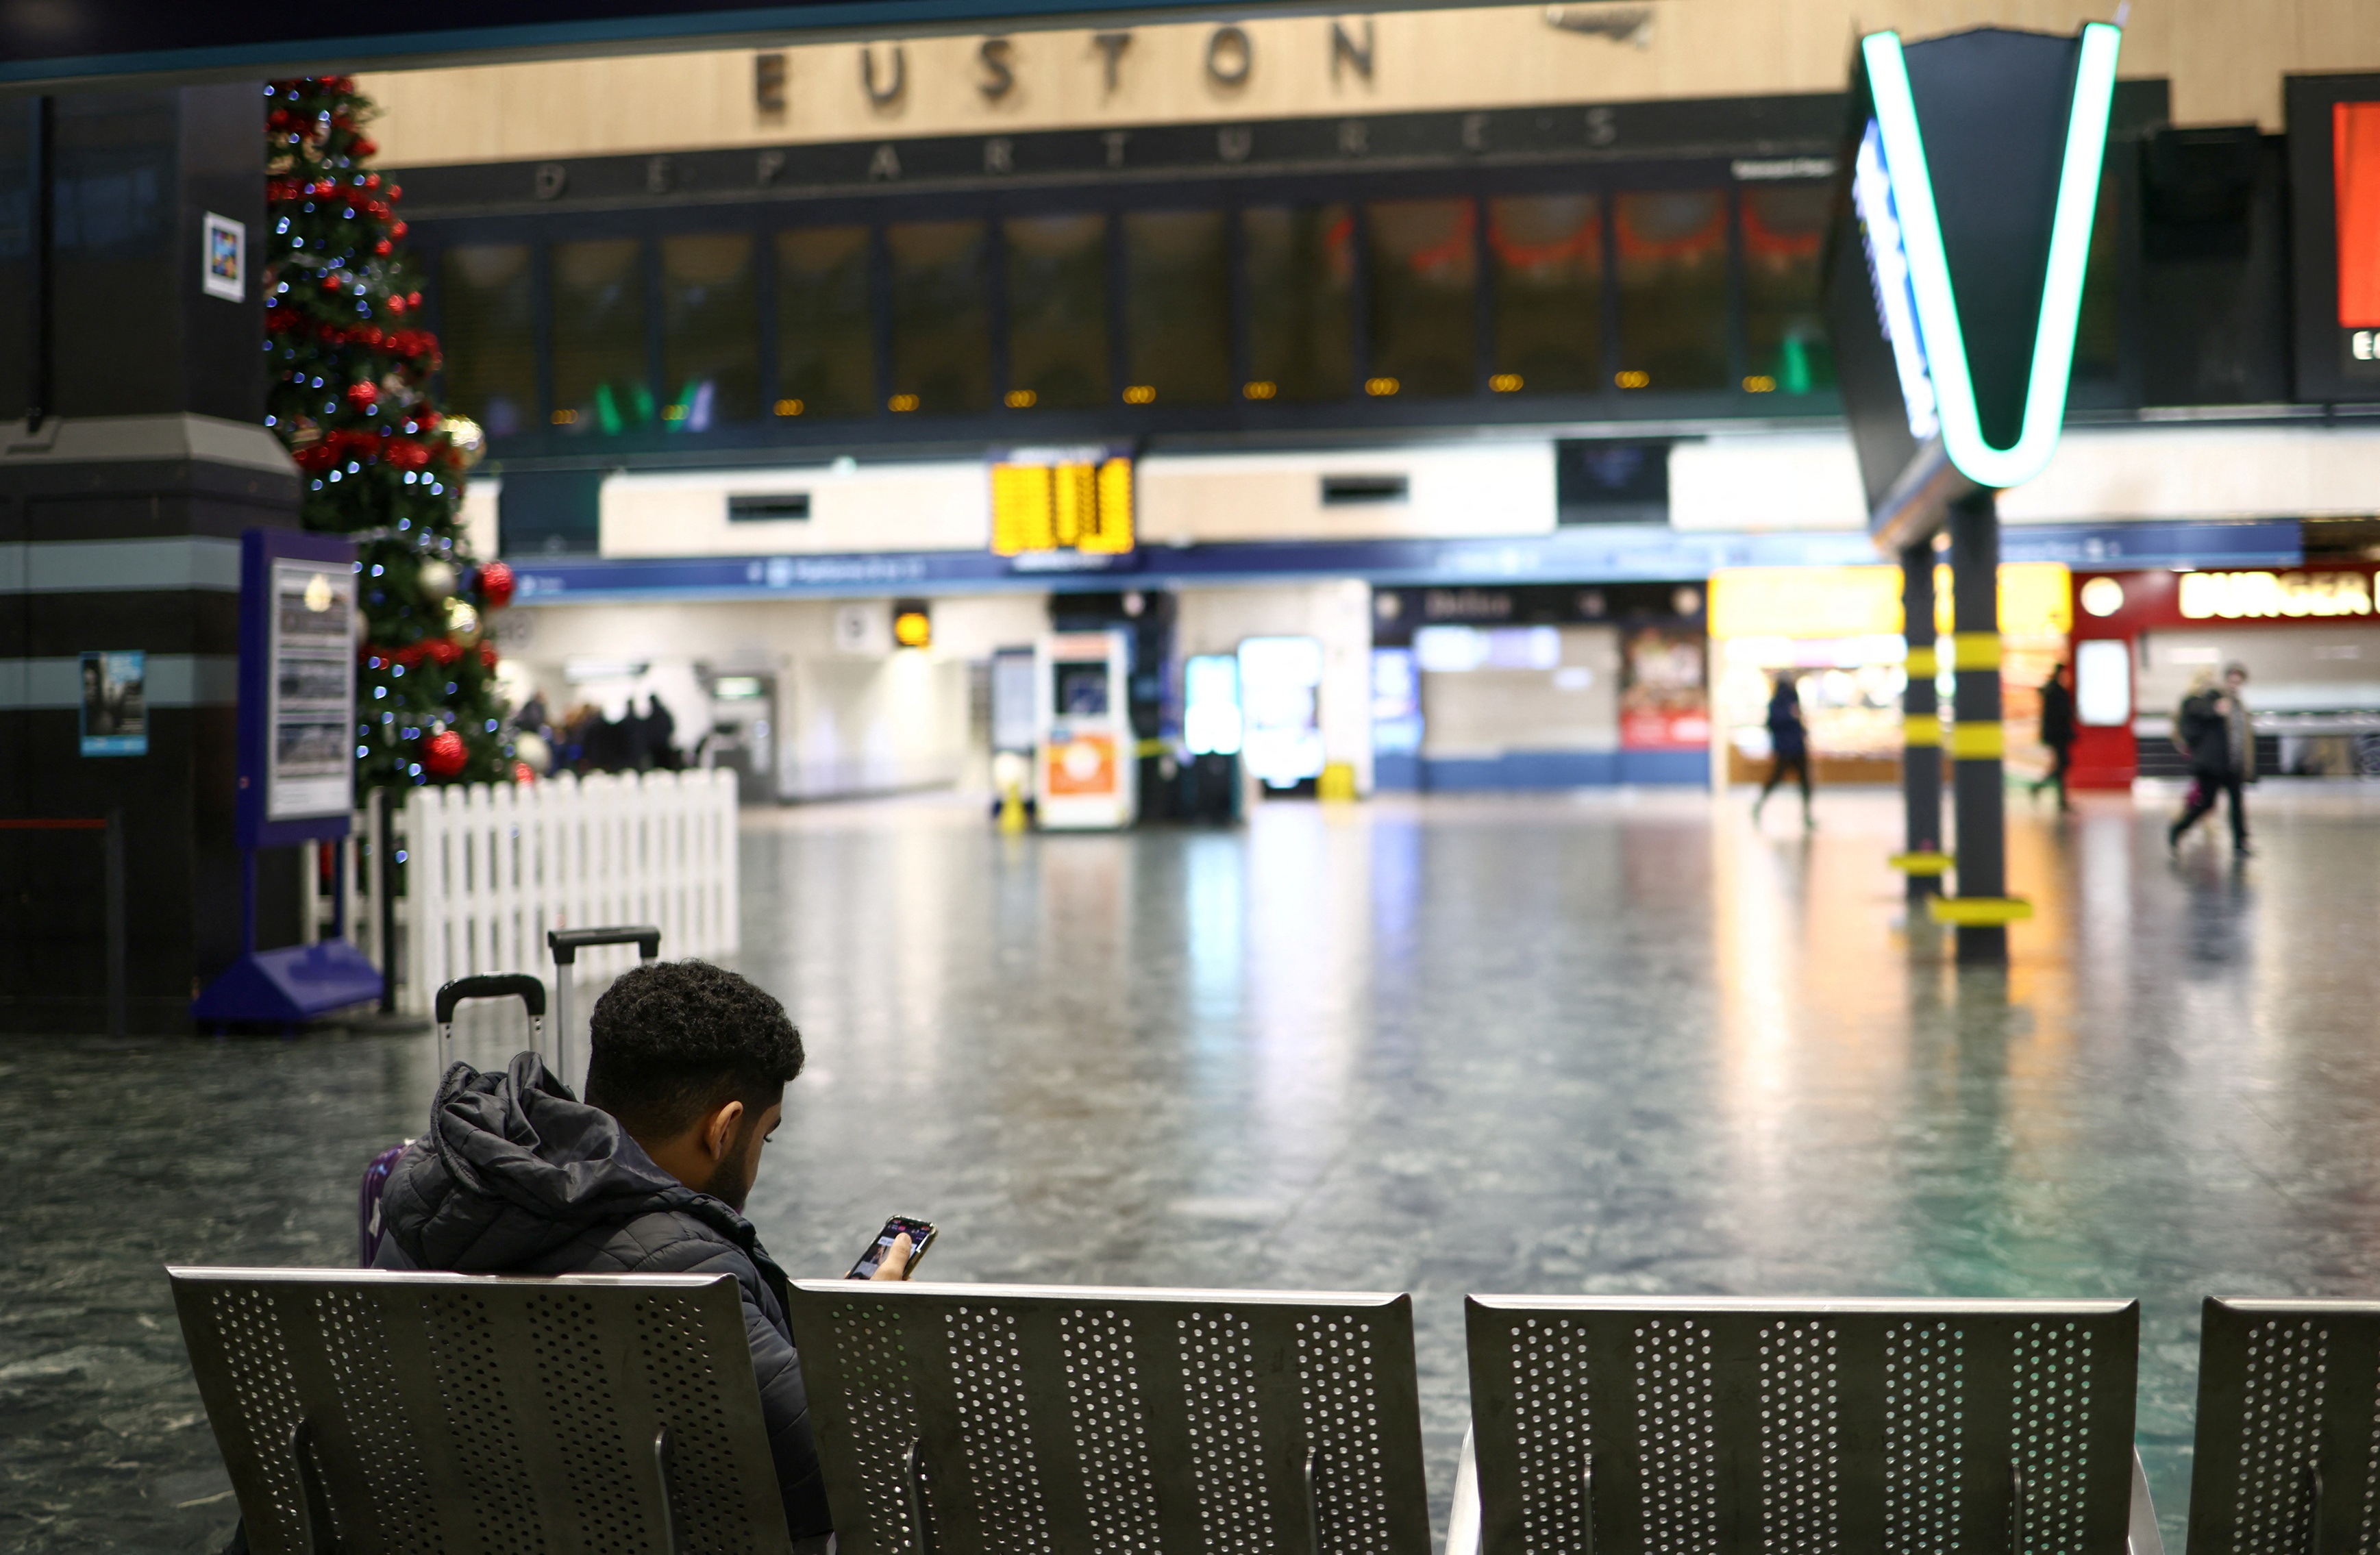 A person sits in a waiting room inside Euston station, as railway workers strike members of the ASLEF union in London, Britain, January 5, 2023. REUTERS/Henry Nicholls